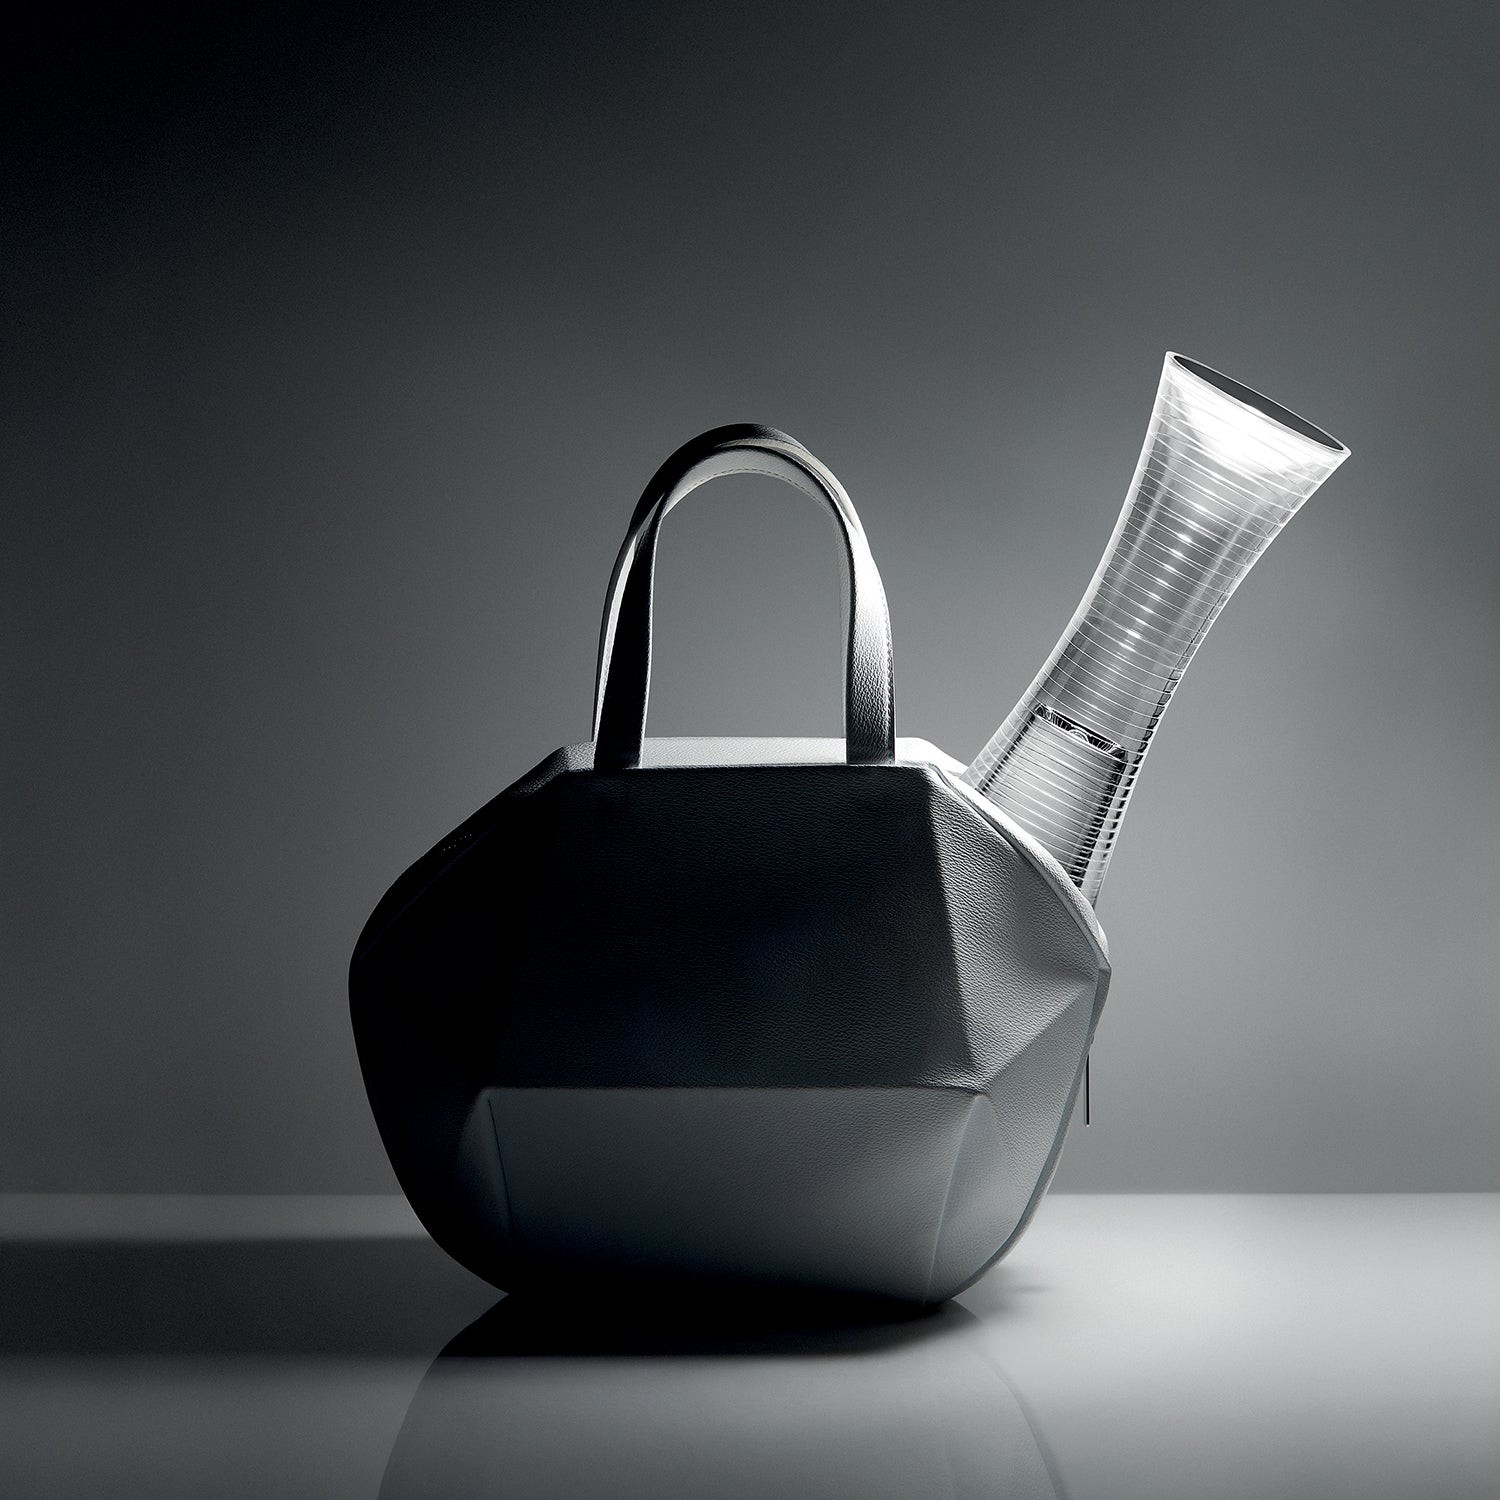 Artemide Come Together Portable Lamp Ambience image showing the lamp in a bag